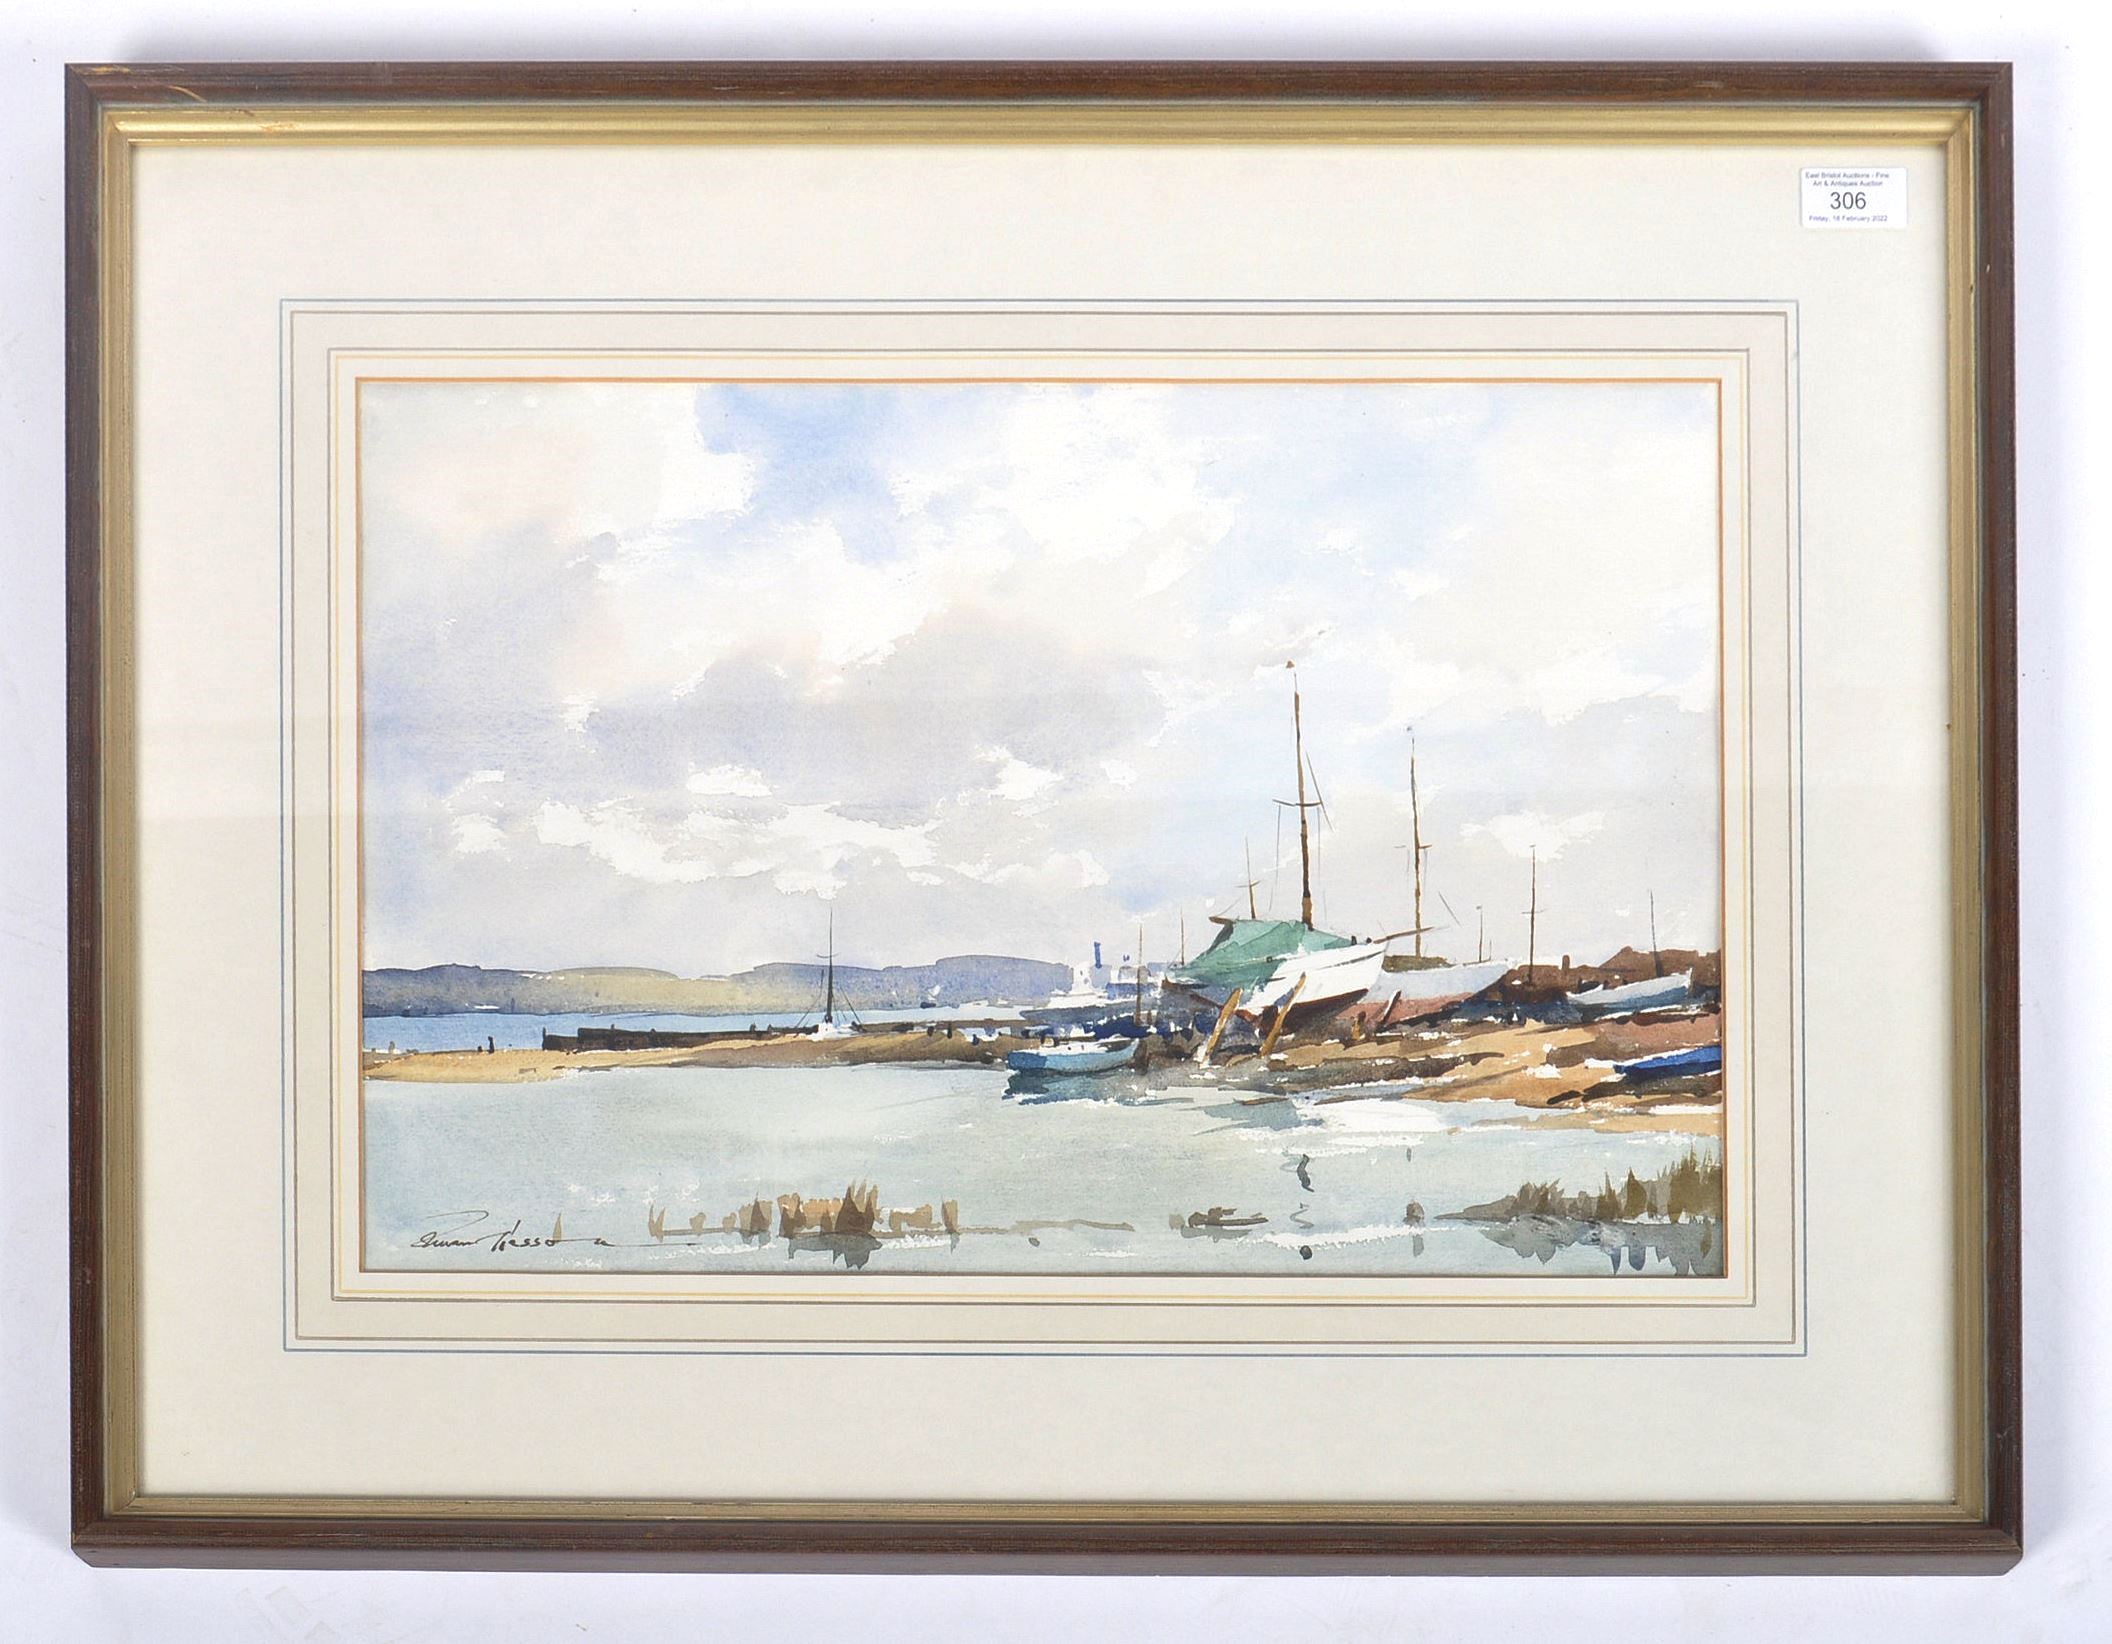 EDWARD WESSON (1910-1983) - WATERCOLOUR PAINTING OF ISLE OF WIGHT